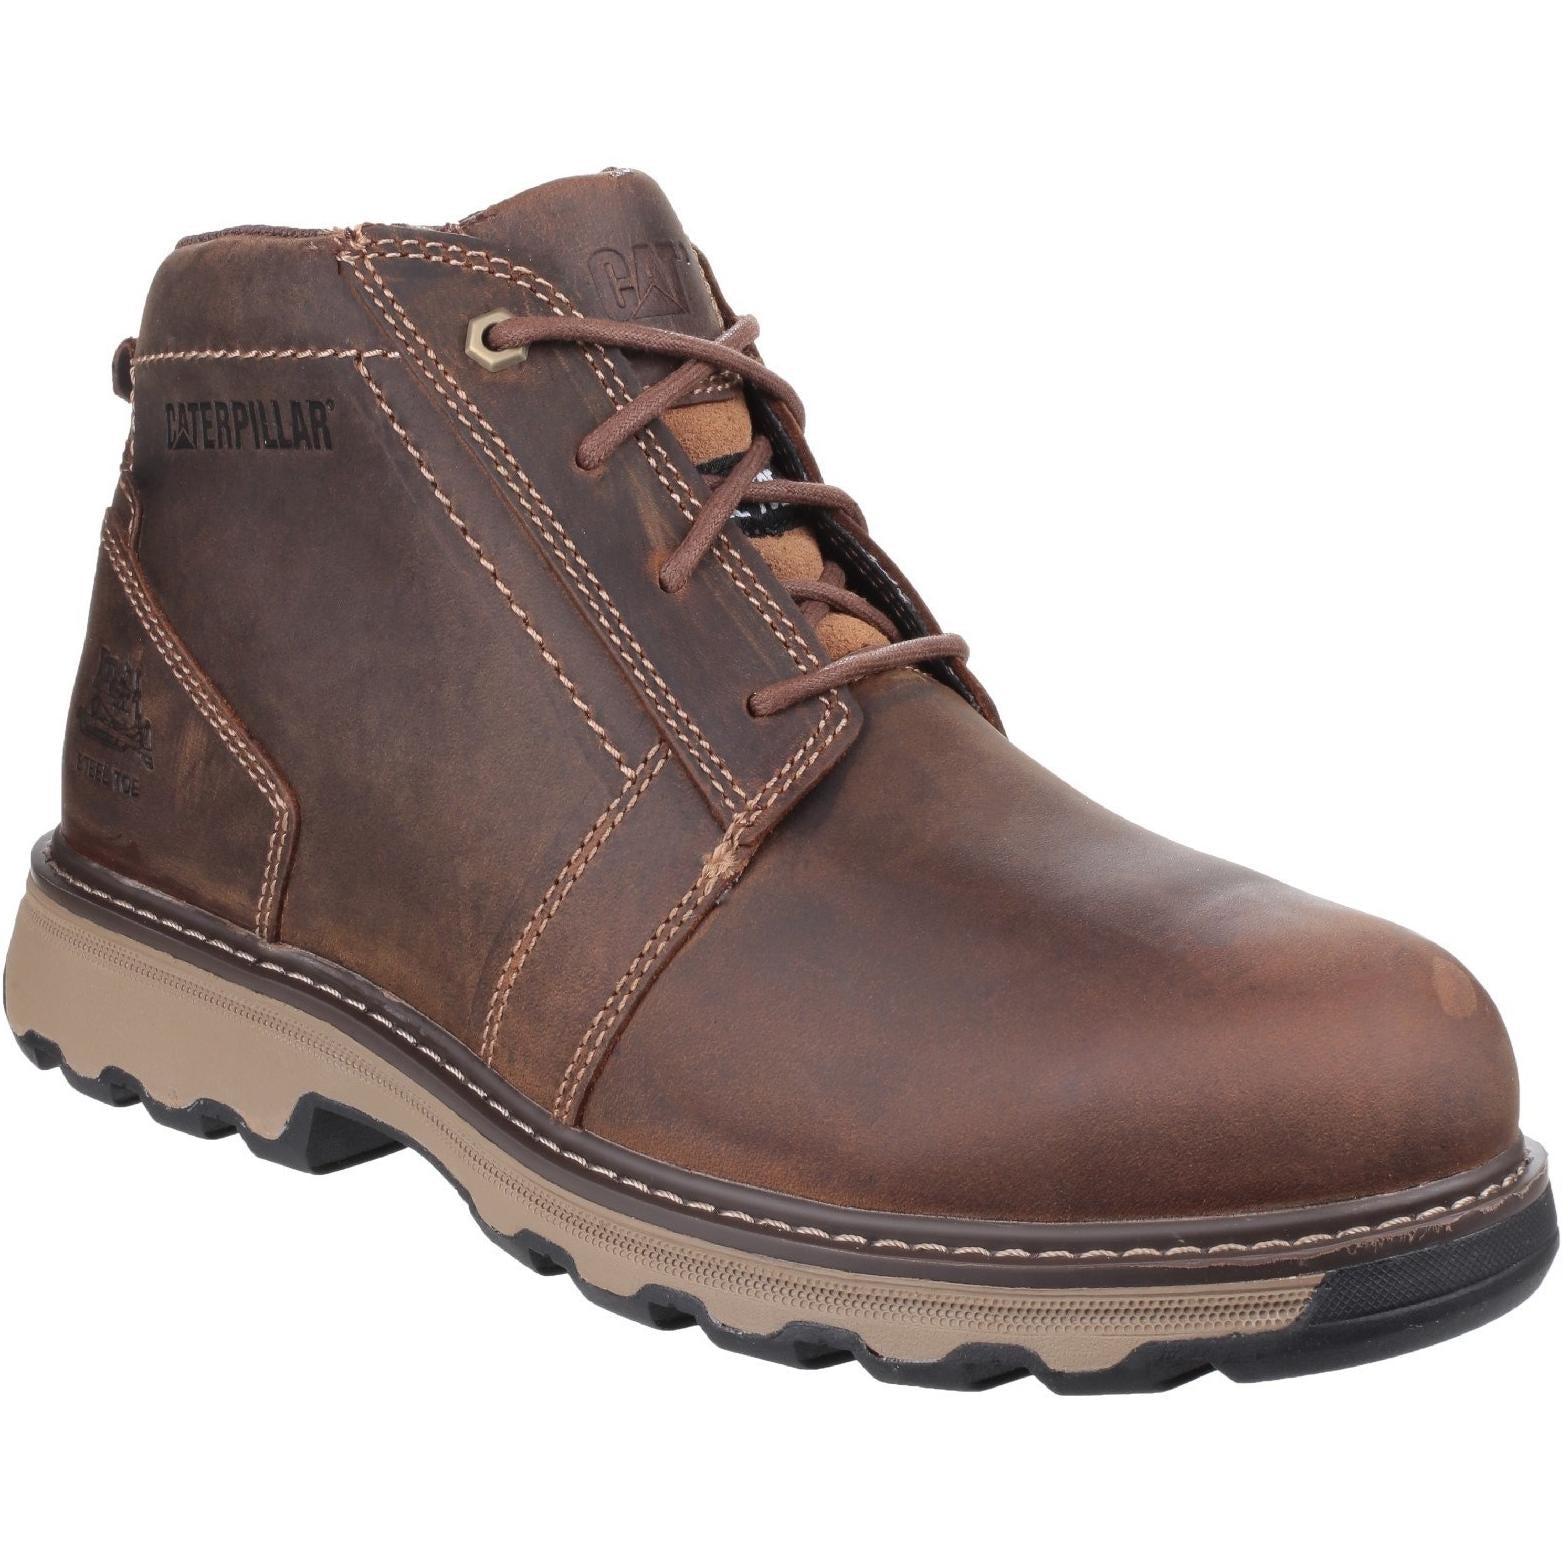 Cat Footwear Parker Safety Boot